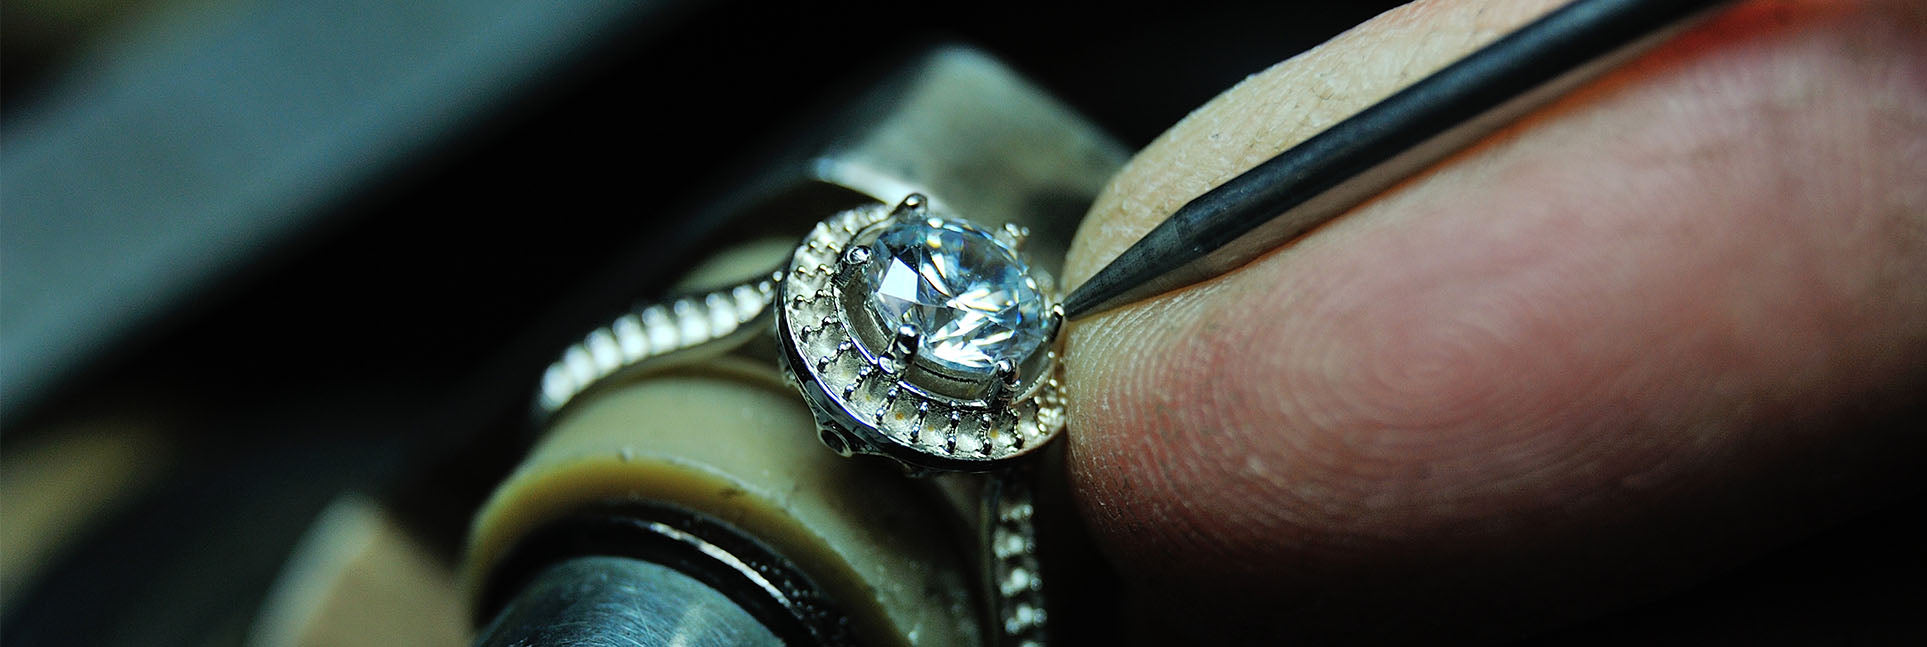 link to diamond and jewellery education section 